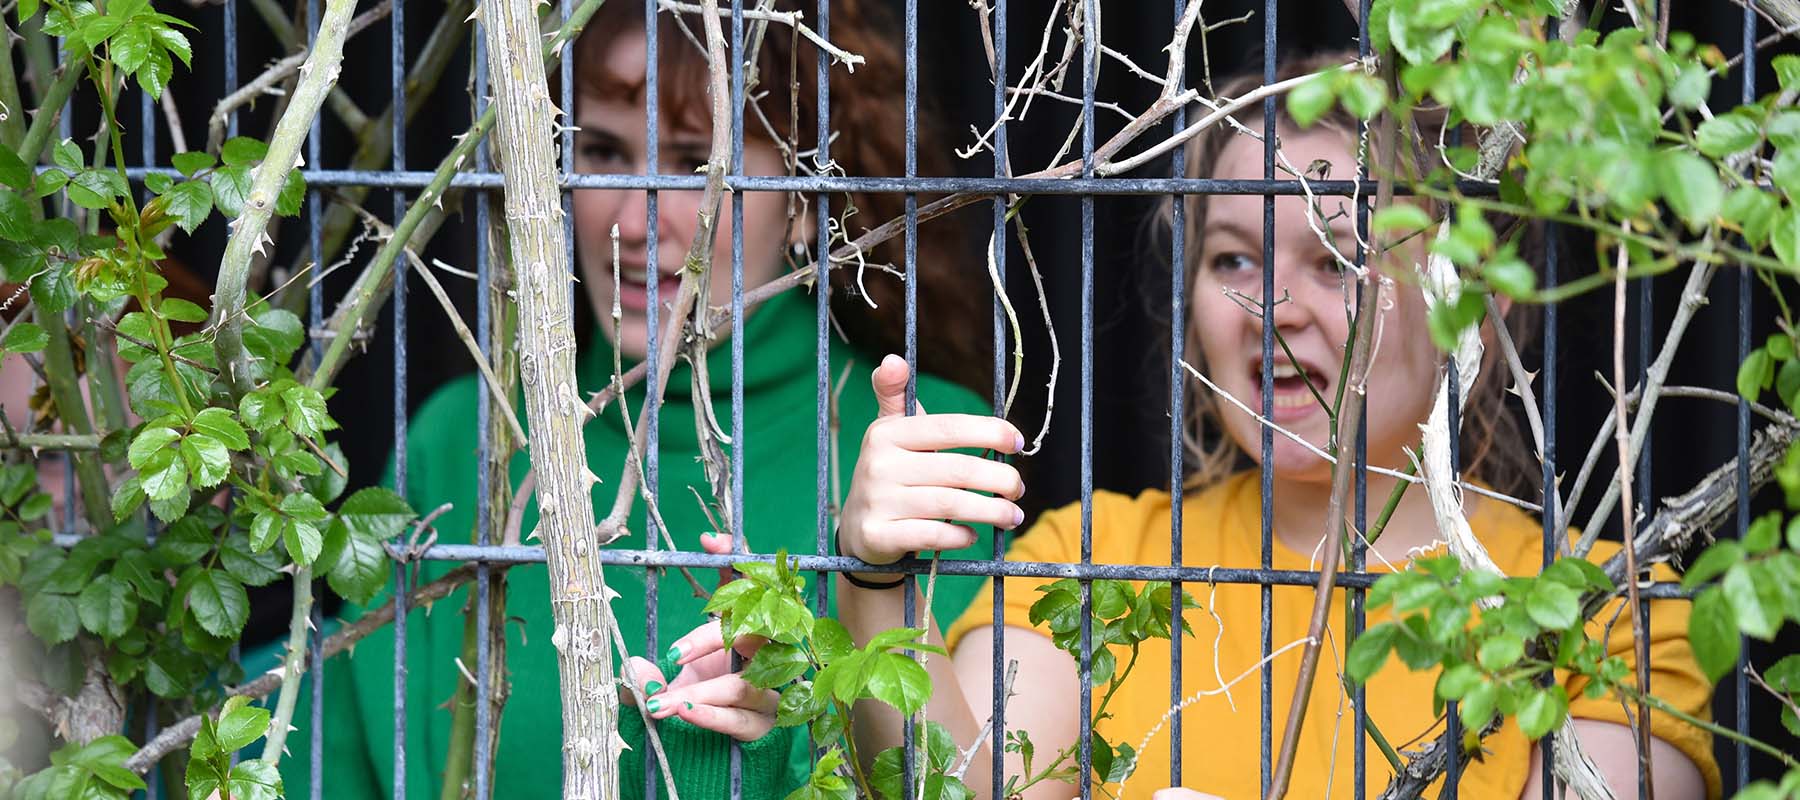 Two female students looking through a fence covered in foliage